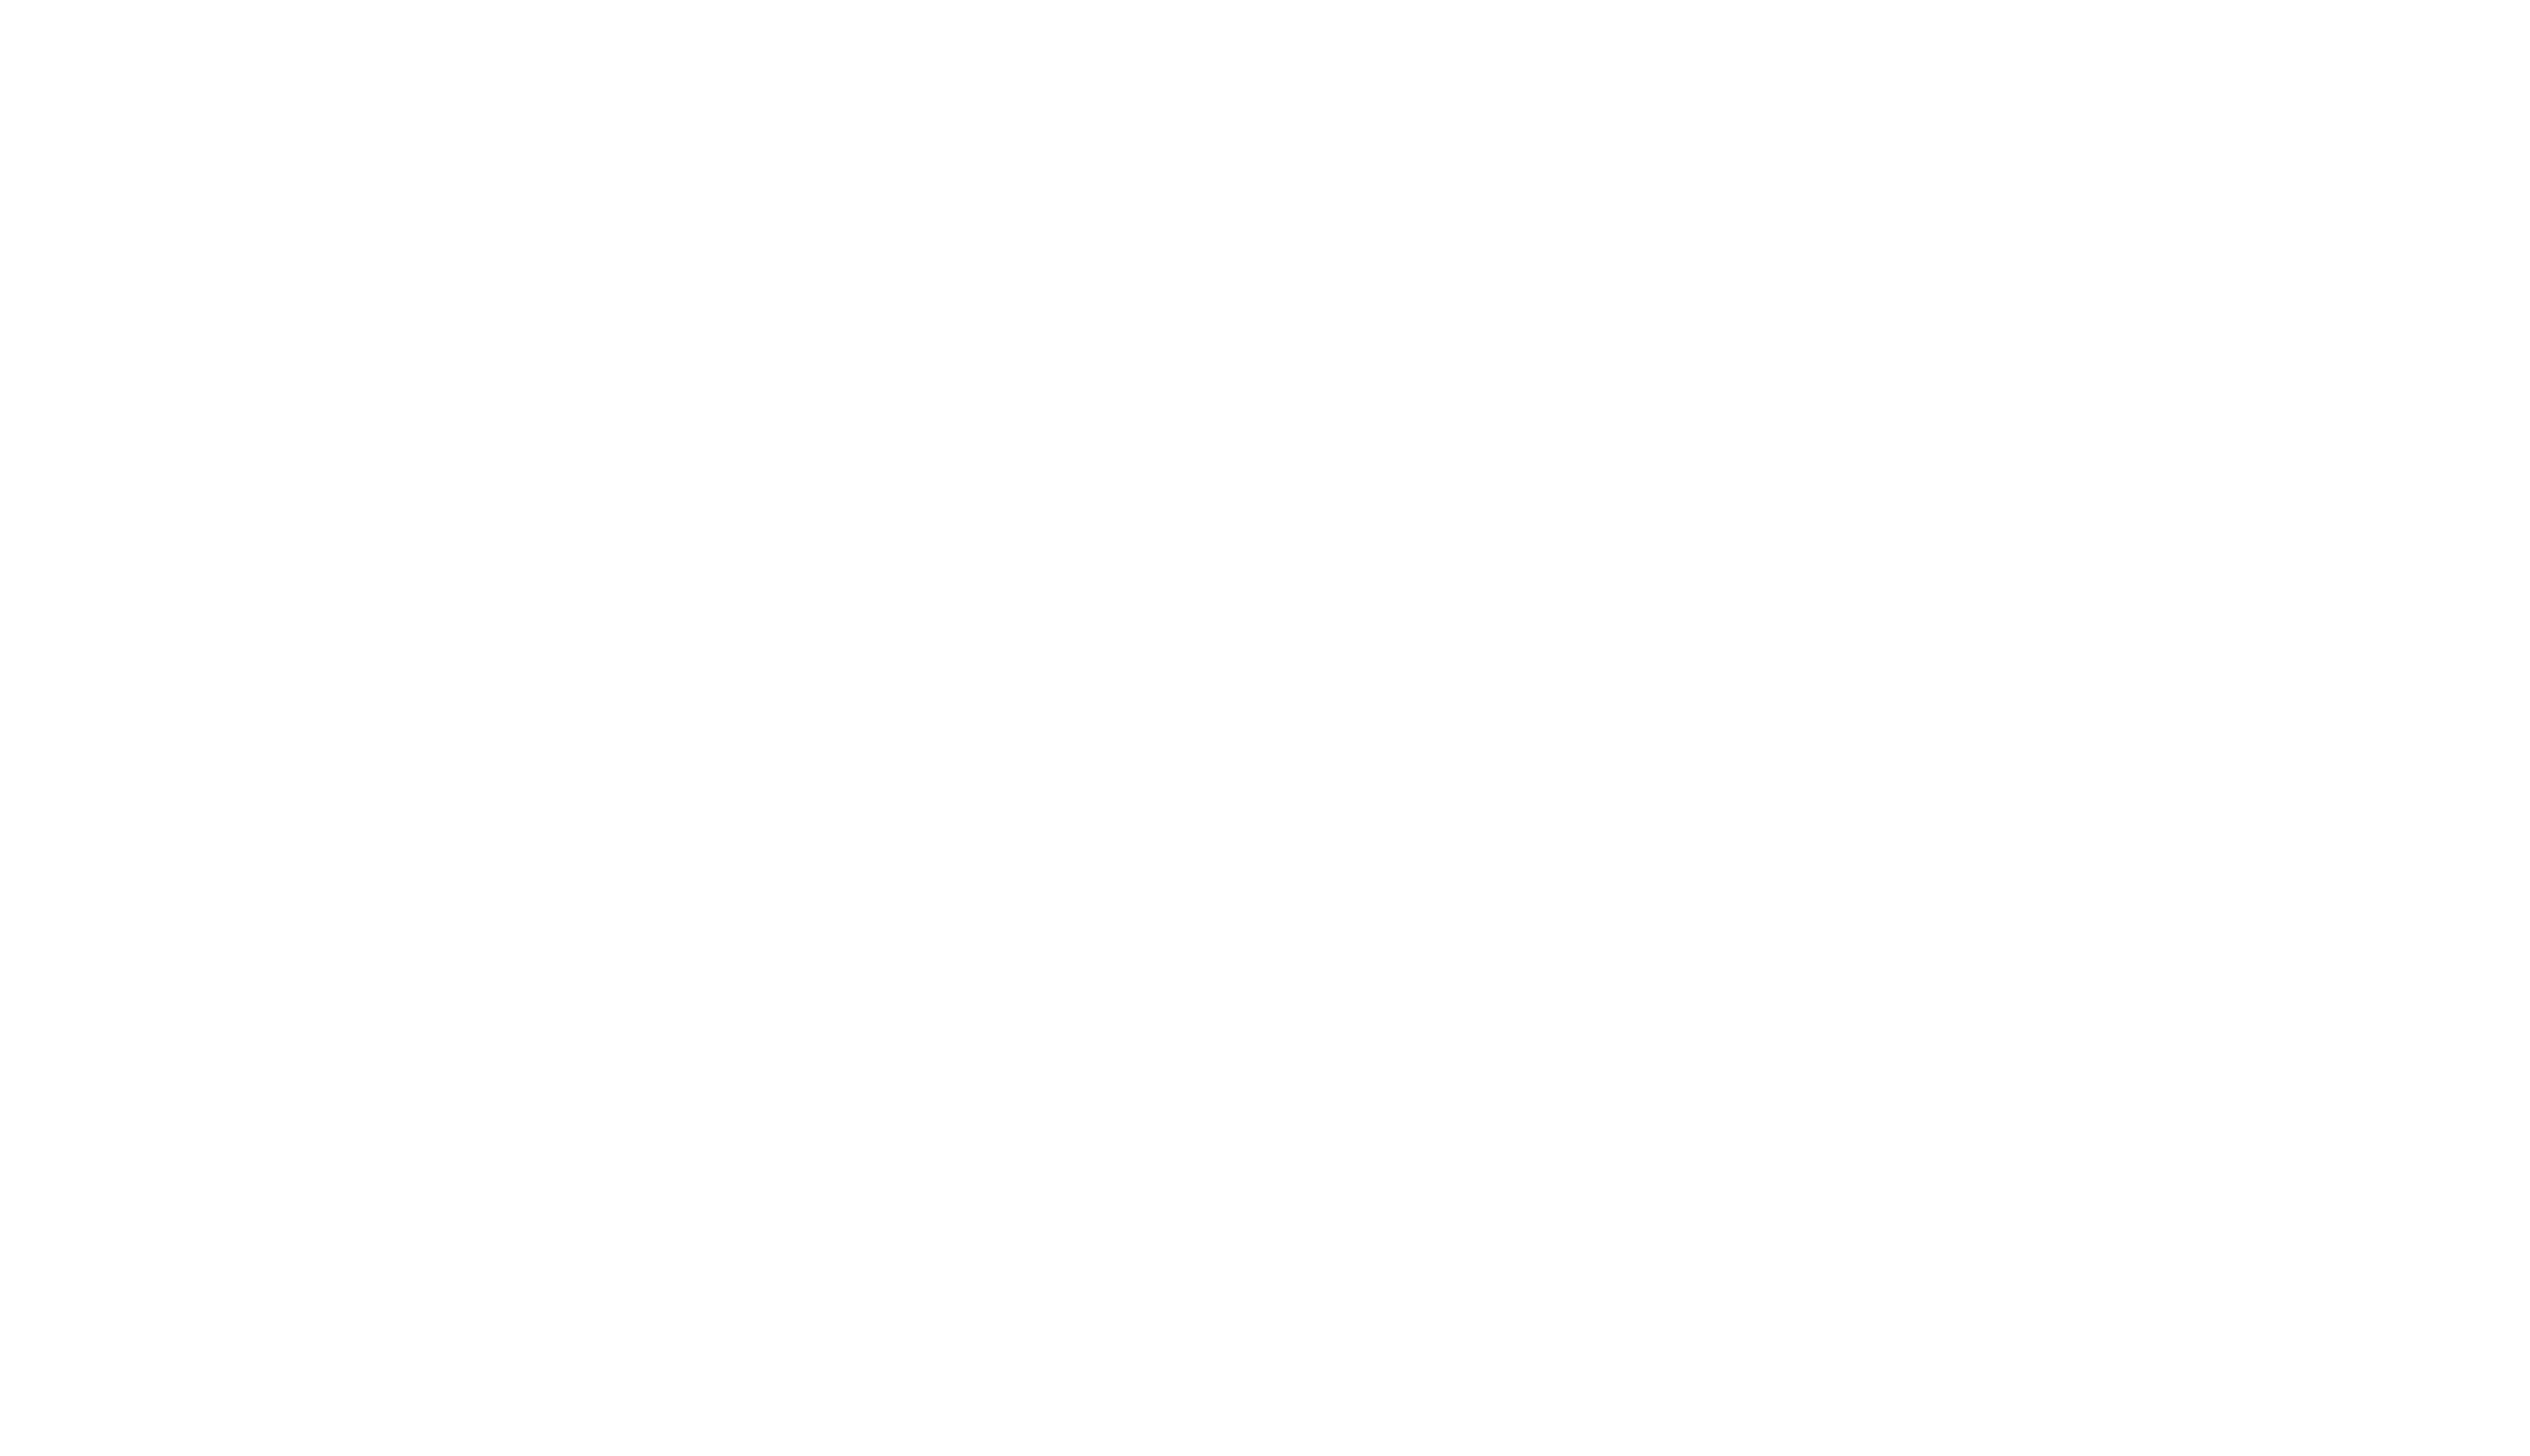 The image depicts a white calendar icon against a black background. The calendar is simplified, showing a rectangular shape with two tabs at the top representing the binding. Inside the calendar, there are several dots arranged in a grid pattern, representing individual days or events.